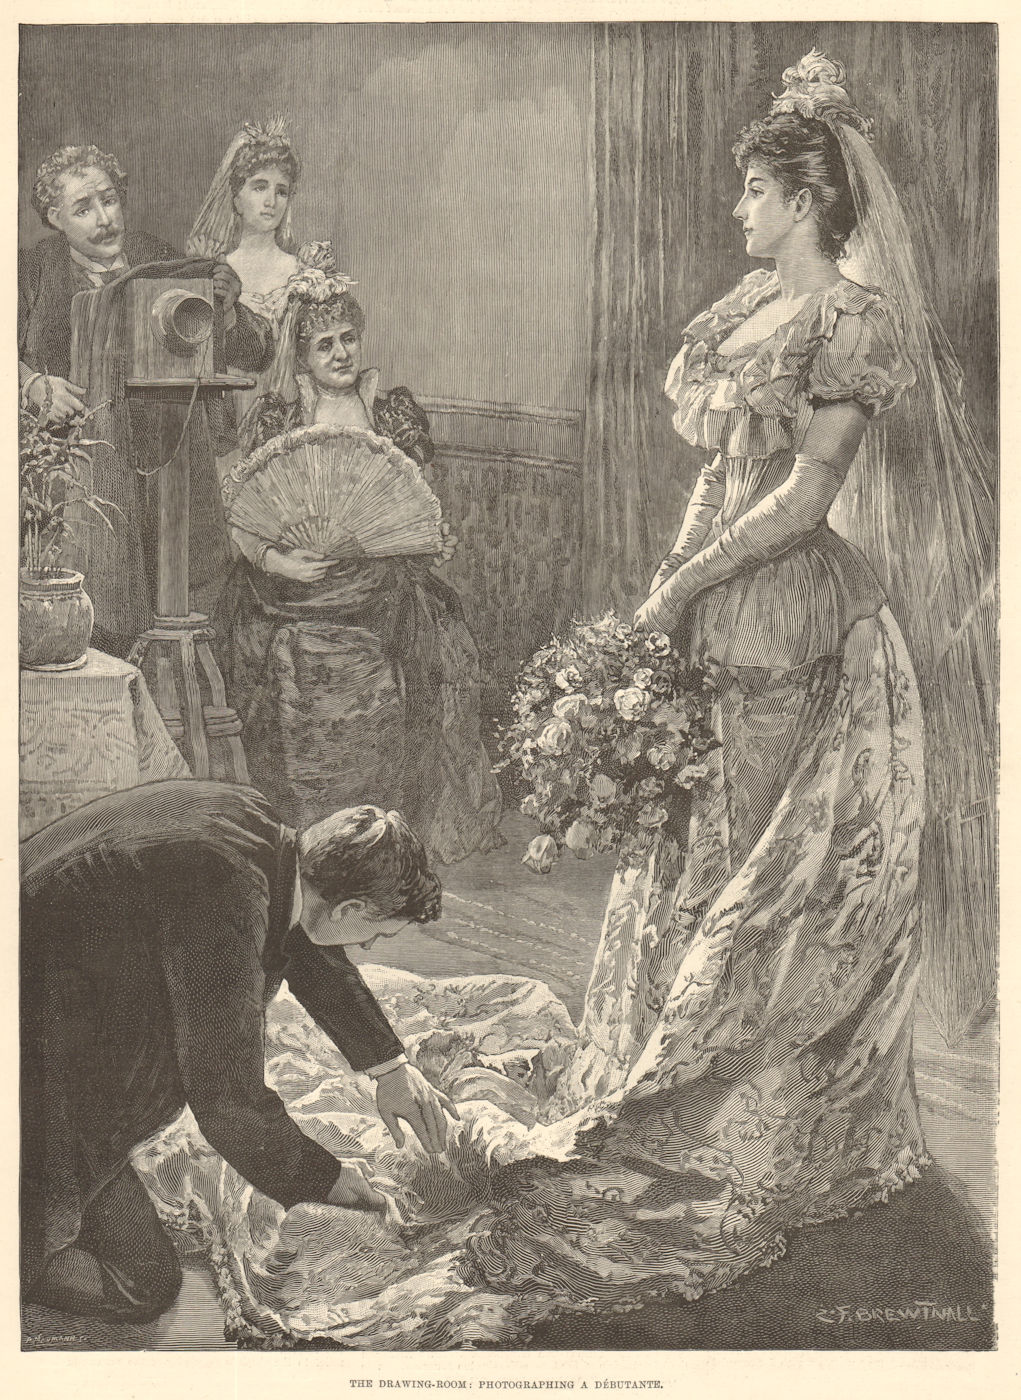 The drawing-room: Photographing a debutante. Pretty Ladies. Fine arts 1893